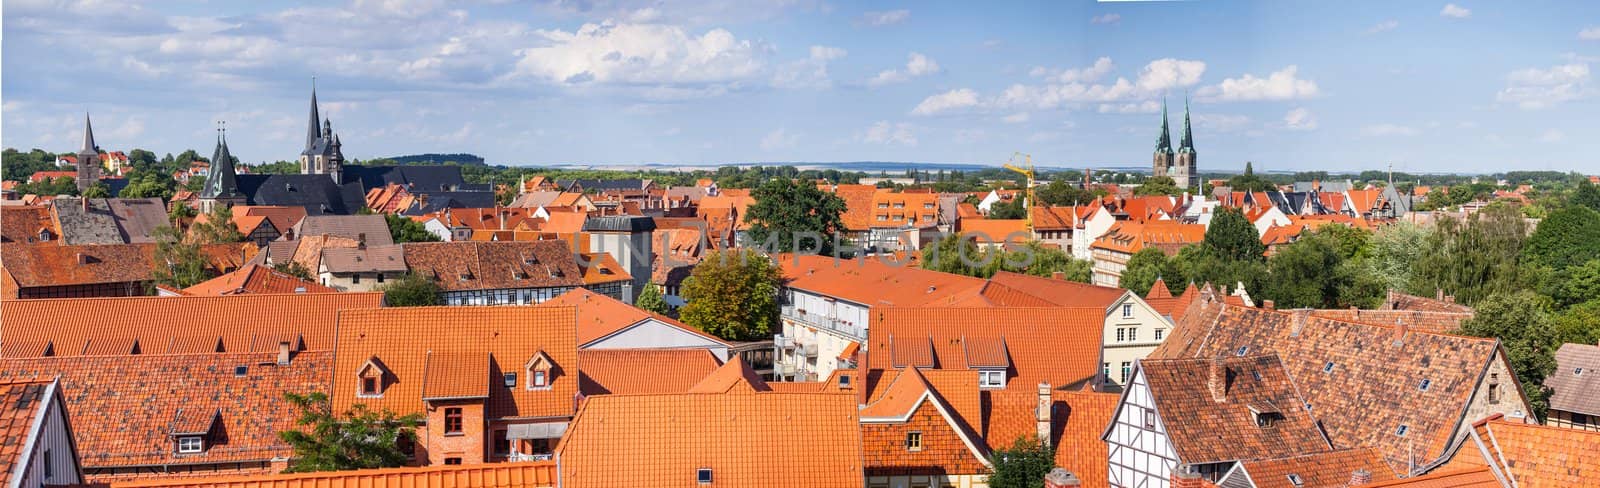 Bird's eye view of the tiled roofs of medieval houses in the historical center of europe city. Panoramic view